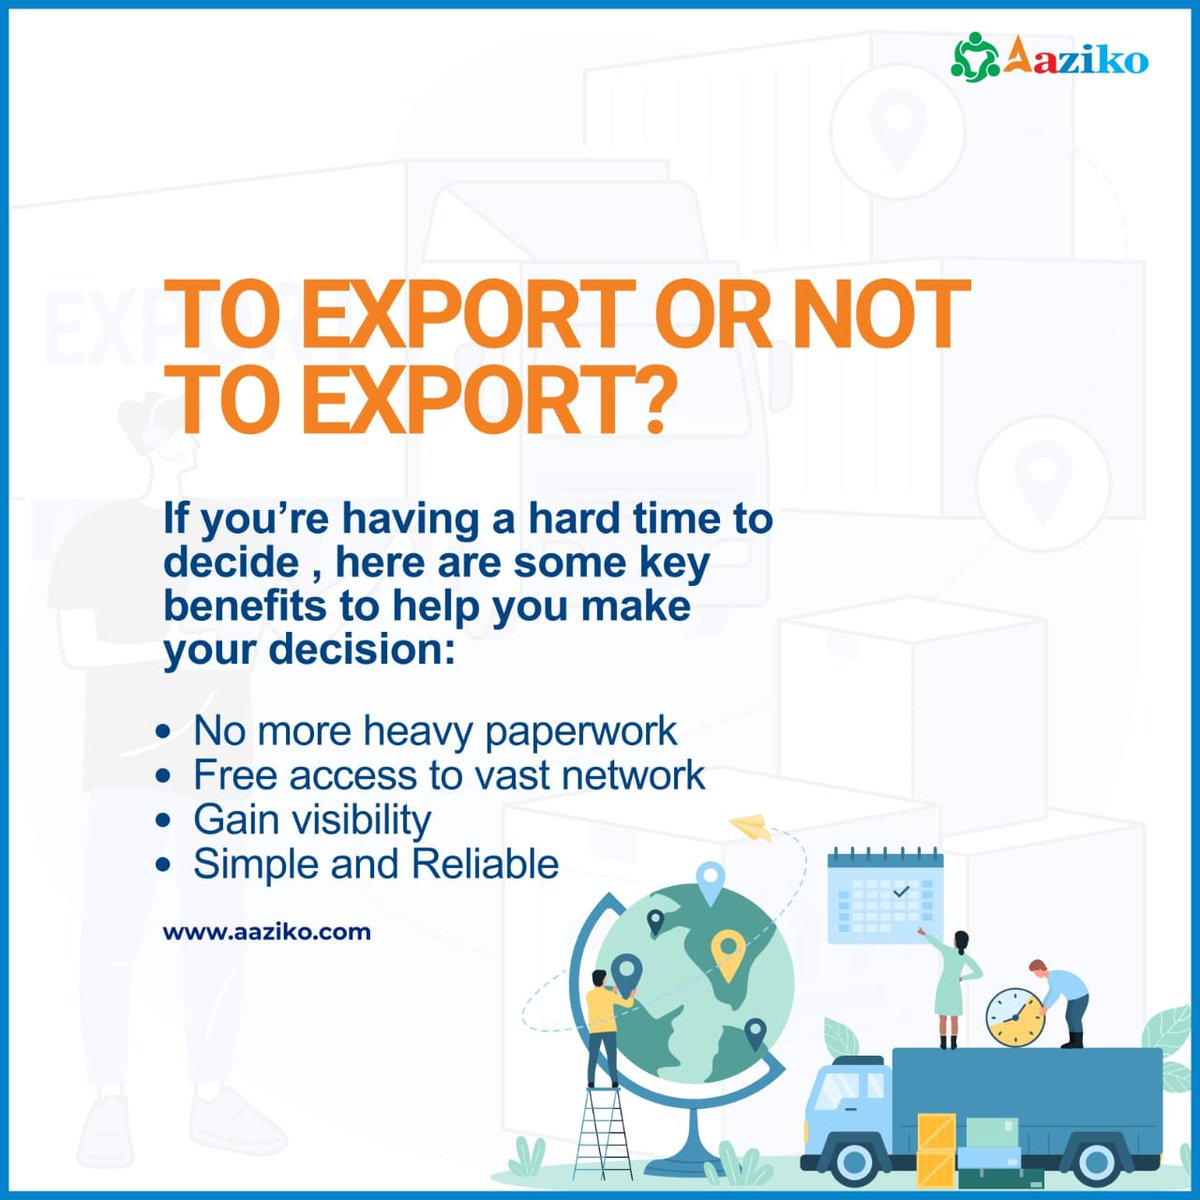 Exporting your products shouldn't be a dilemma; it's a gateway to endless possibilities! No paperwork hassles, simplicity, reliability, and free access to a global network await you. Gain international visibility and elevate your business.
#ExportSuccess #GlobalExpansion